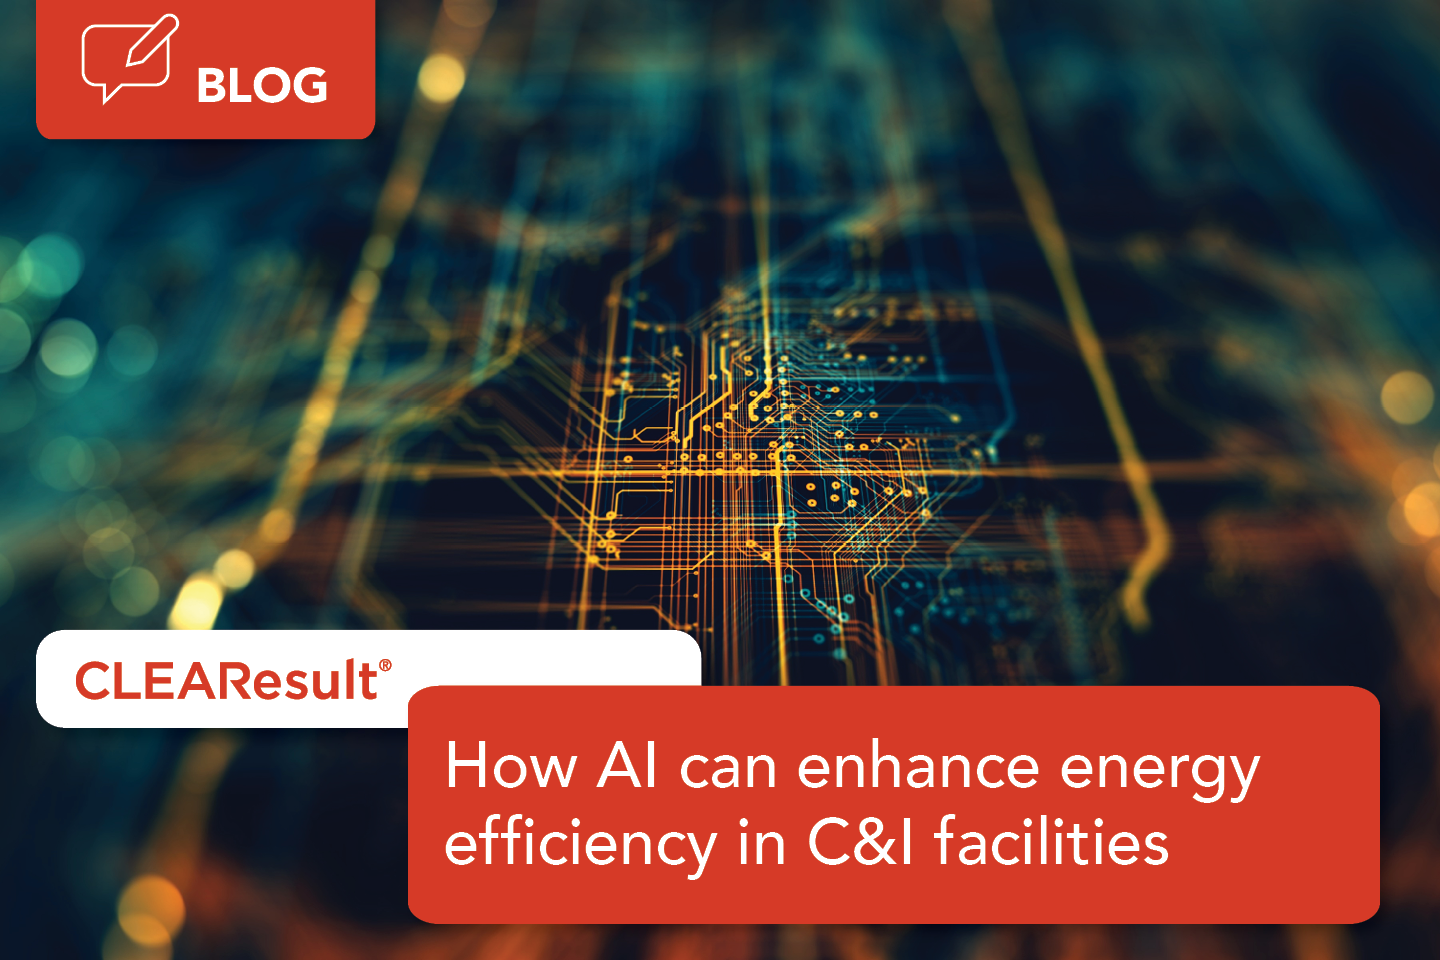 How artificial intelligence can enhance energy efficiency in commercial and industrial facilities